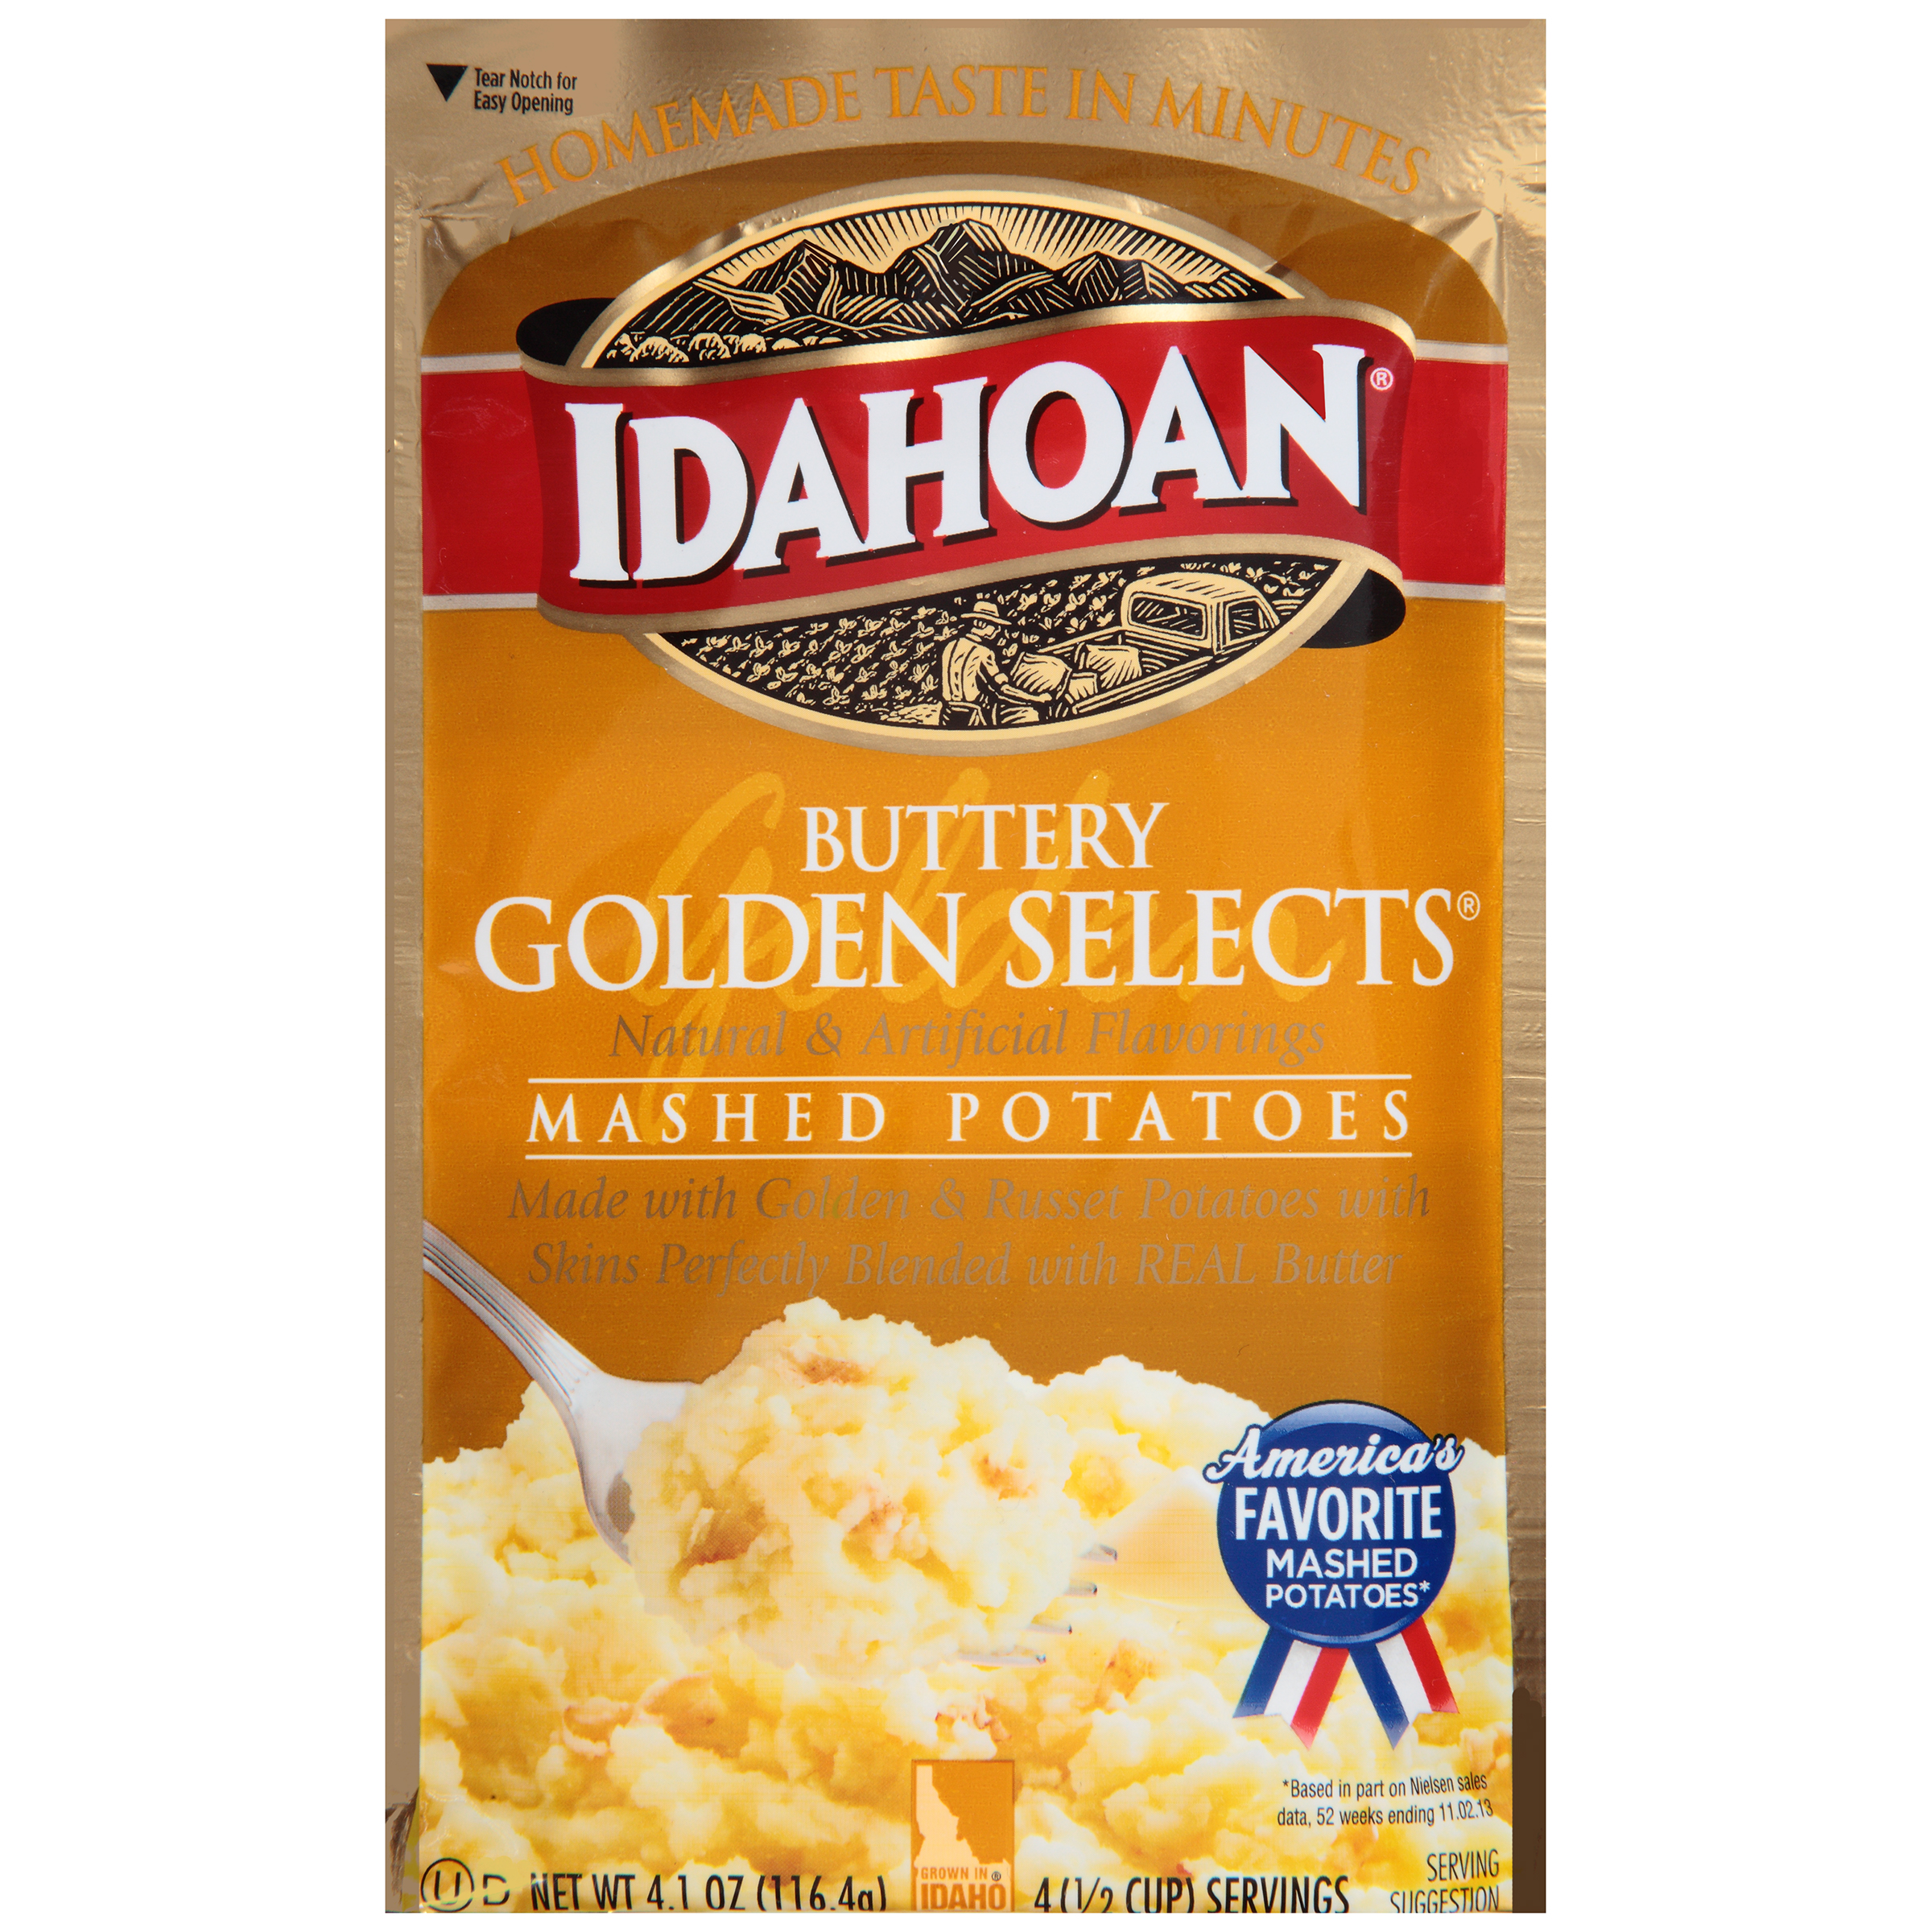 Idahoan Mashed Potatoes, Flavored, Buttery Golden Selects, 4.1 oz (116.4 g)